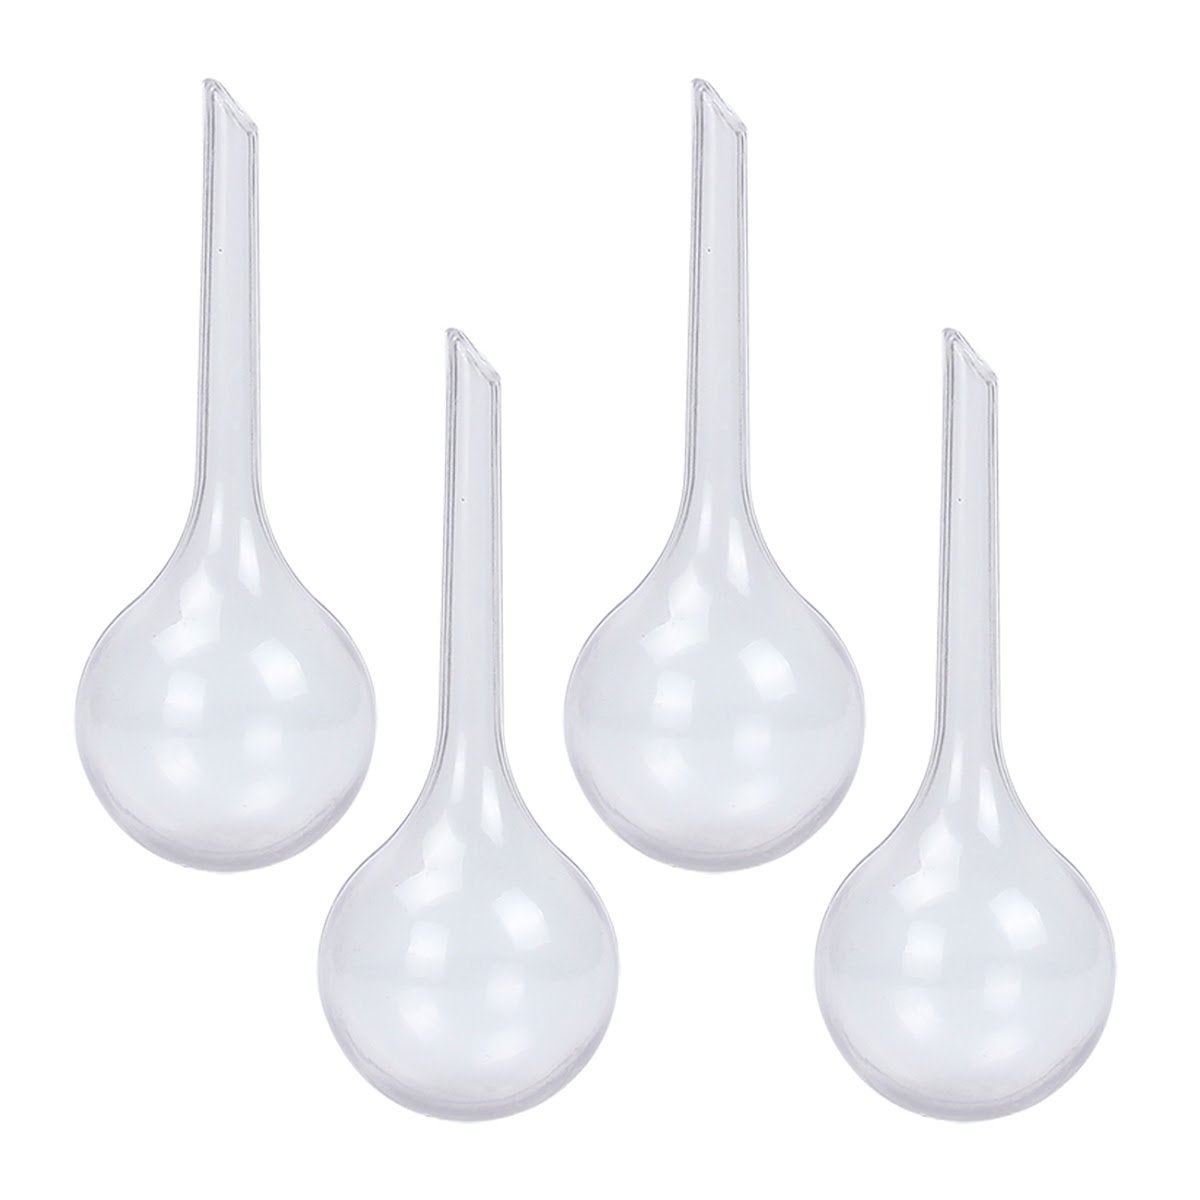 Pack of 4 House Plants PVC Watering Globes